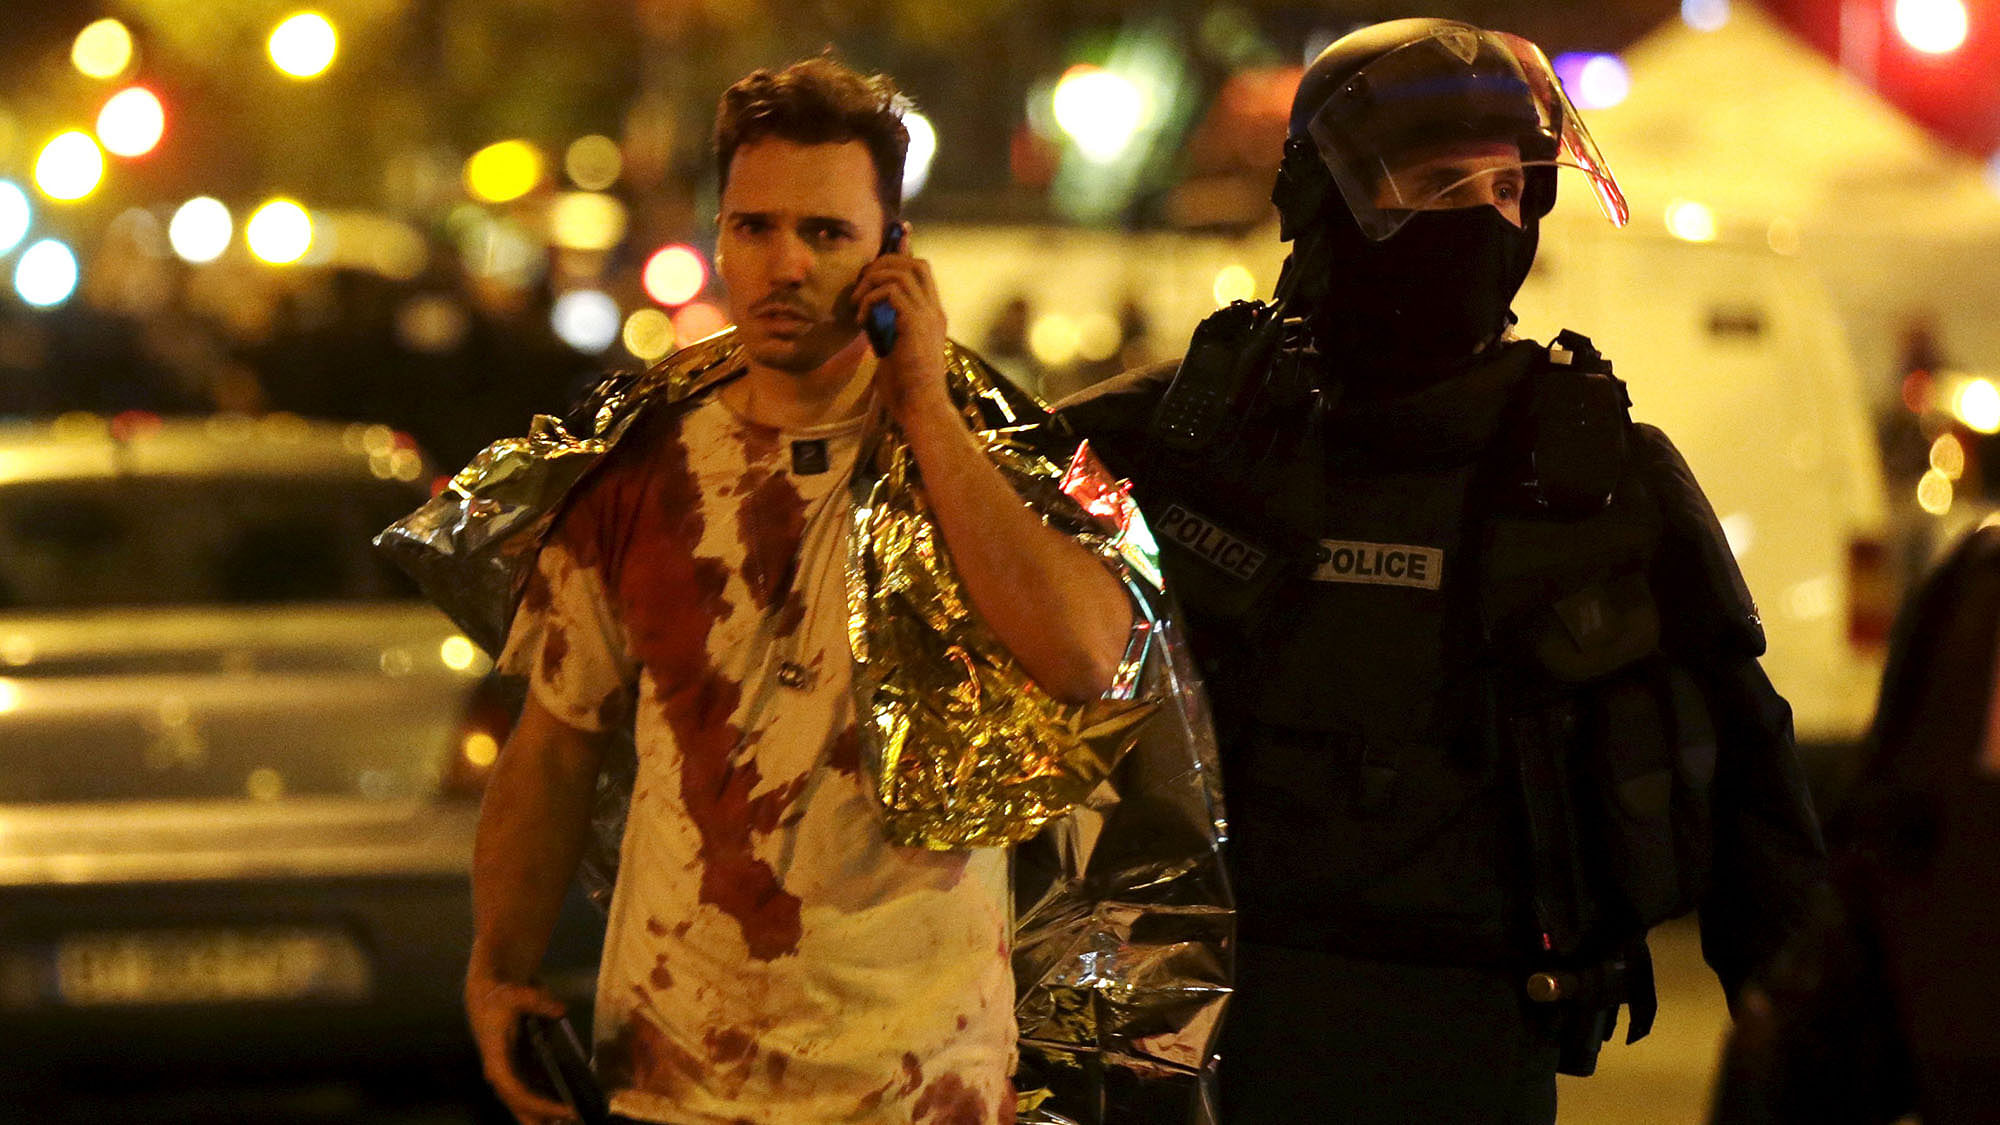 A French policeman assists a blood-covered victim near the Bataclan concert hall following attacks in Paris. (Photo: Reuters)